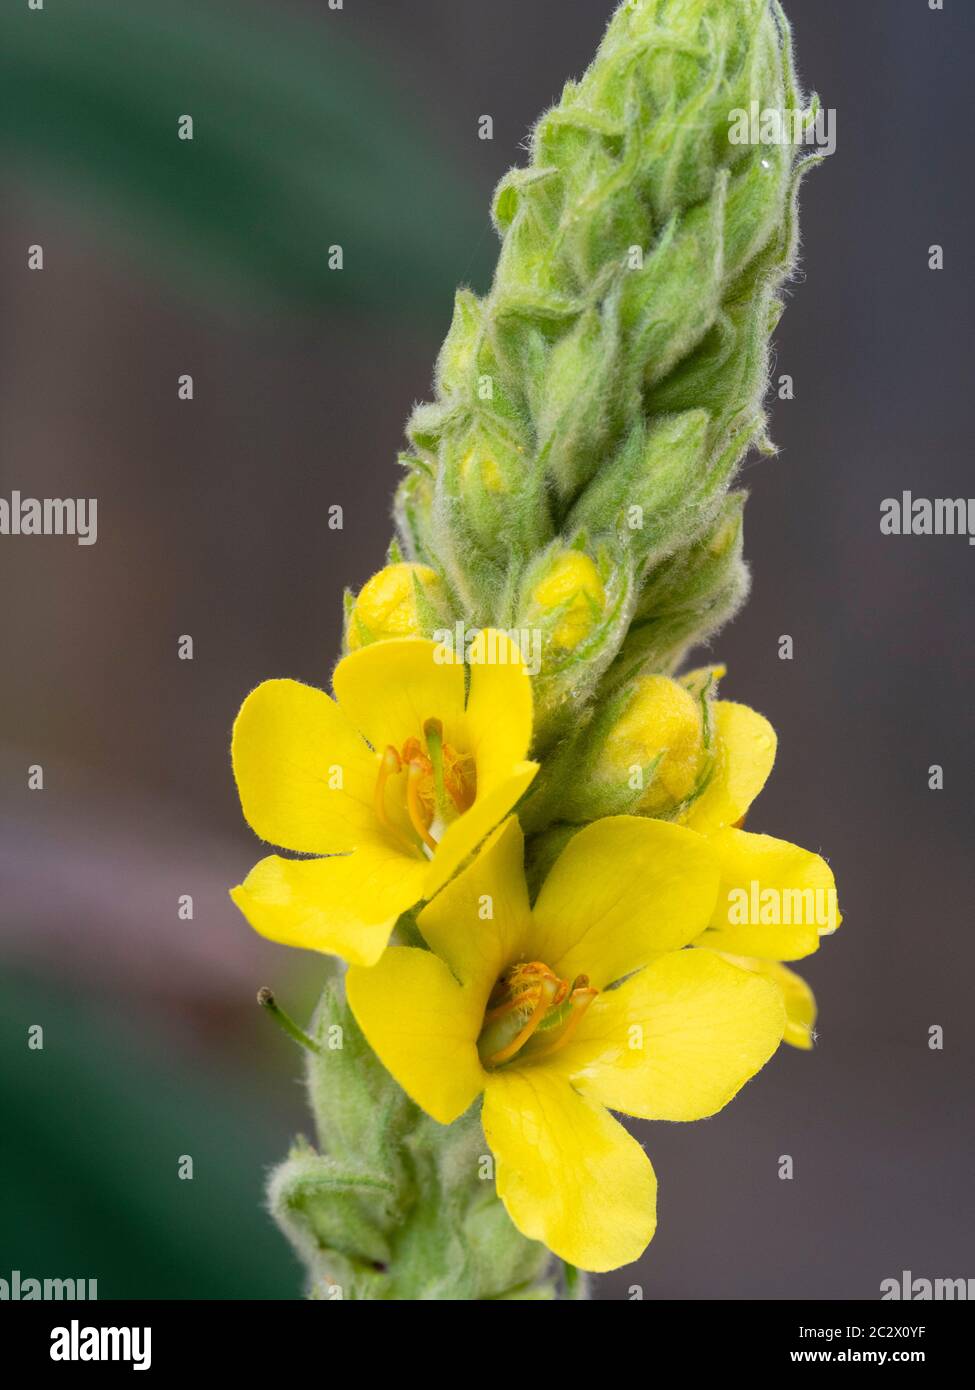 Yellow summer flowers in the spike of common mullein, Verbascum thapsus, a UK wildflower used in herbal medicine Stock Photo